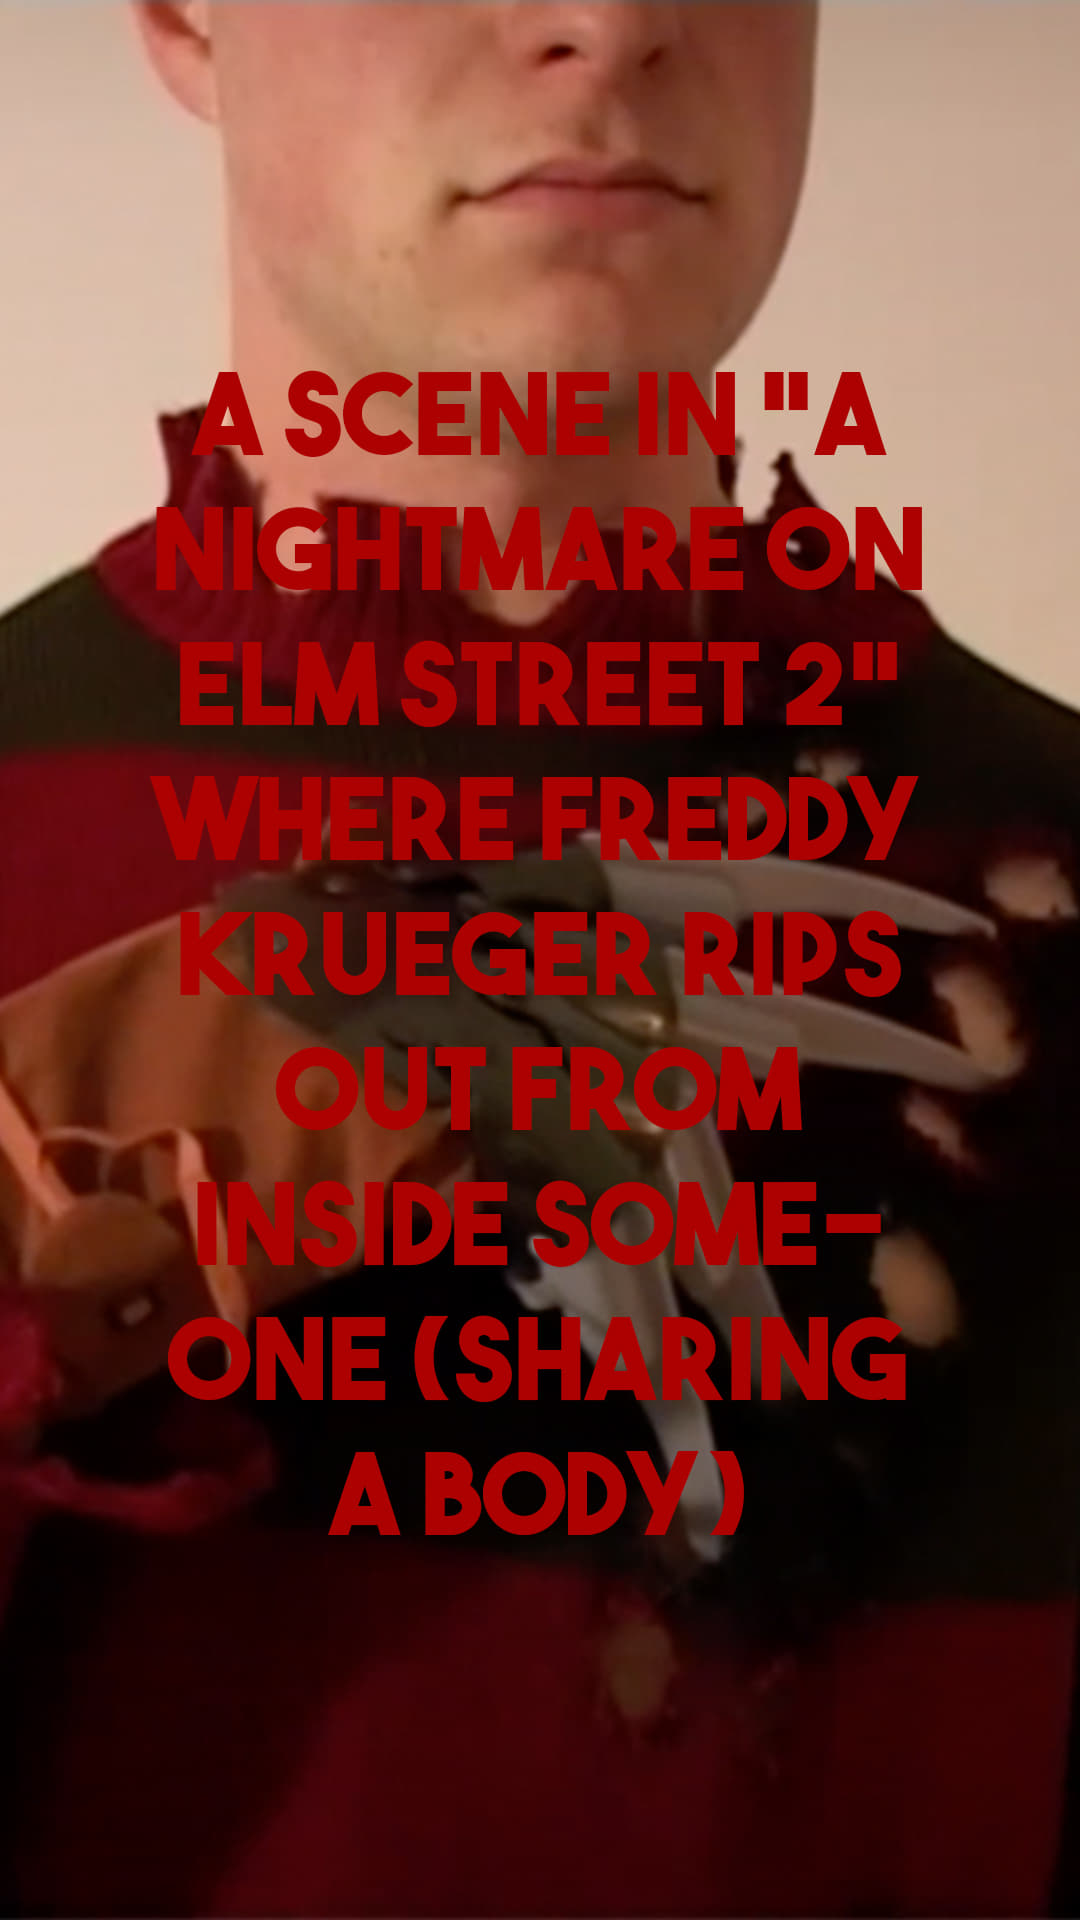 A scene in “A Nightmare on Elm Street 2” where Freddy Krueger rips out from inside someone (sharing a body)